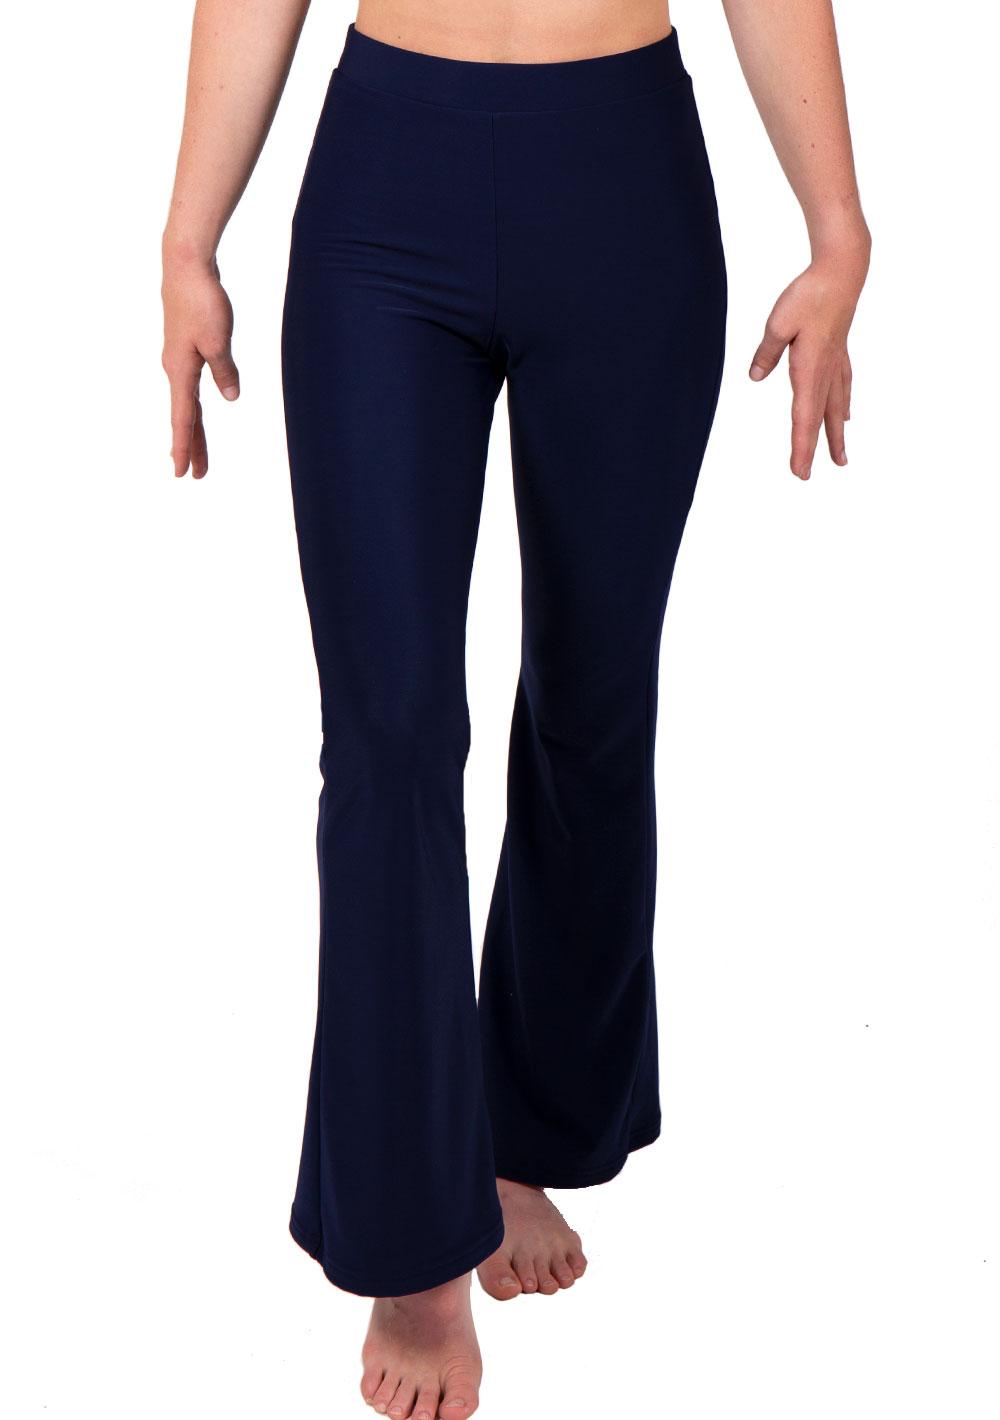 Ladies Tracksuit Trousers Bootleg Fit - A Star Leotards